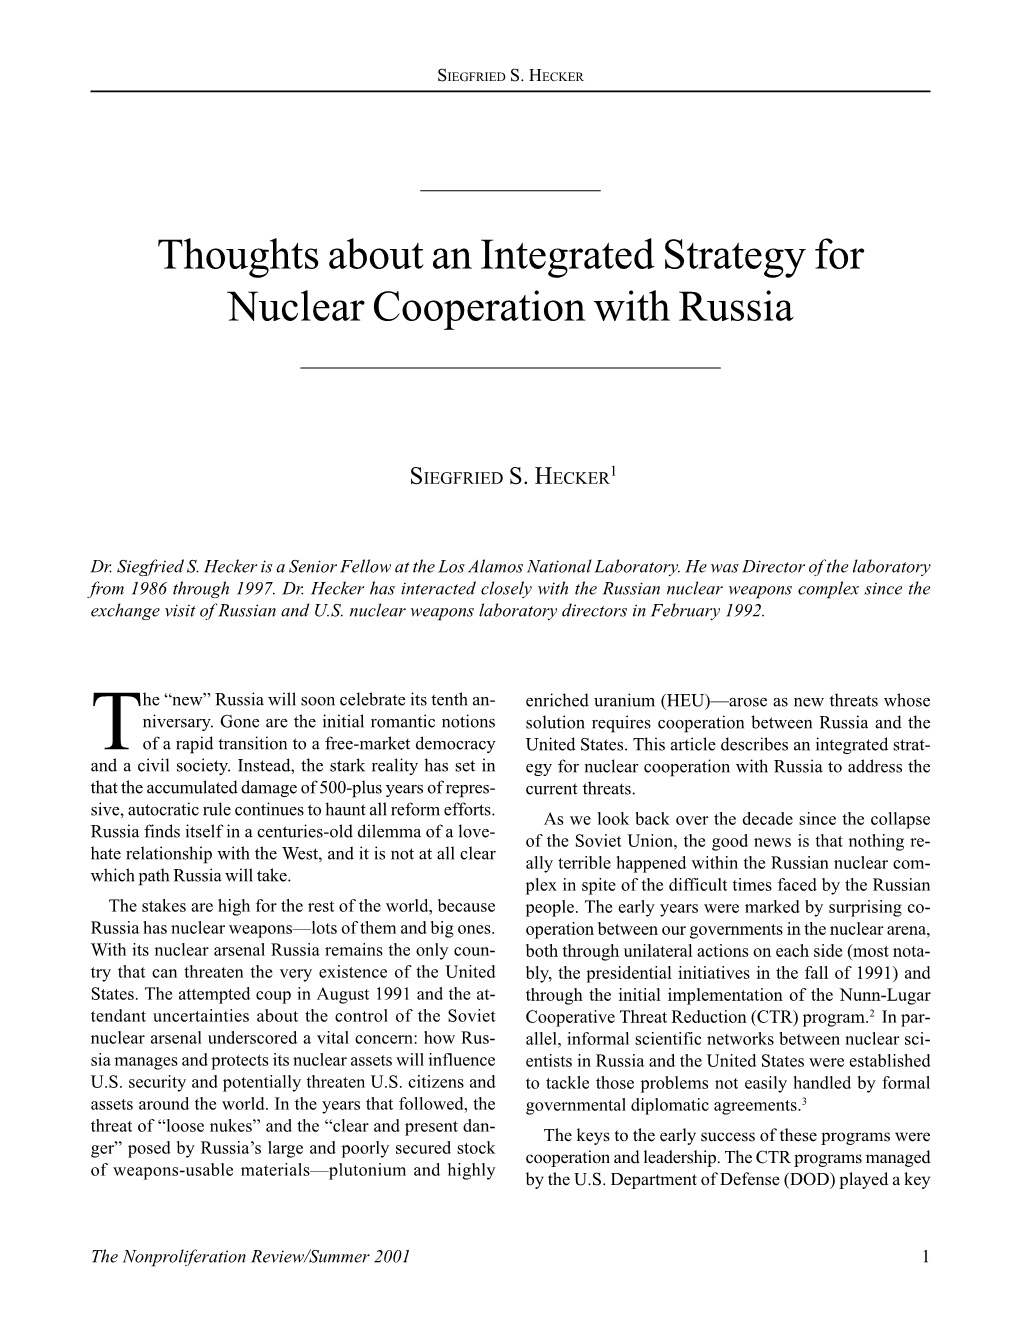 Thoughts About an Integrated Strategy for Nuclear Cooperation with Russia